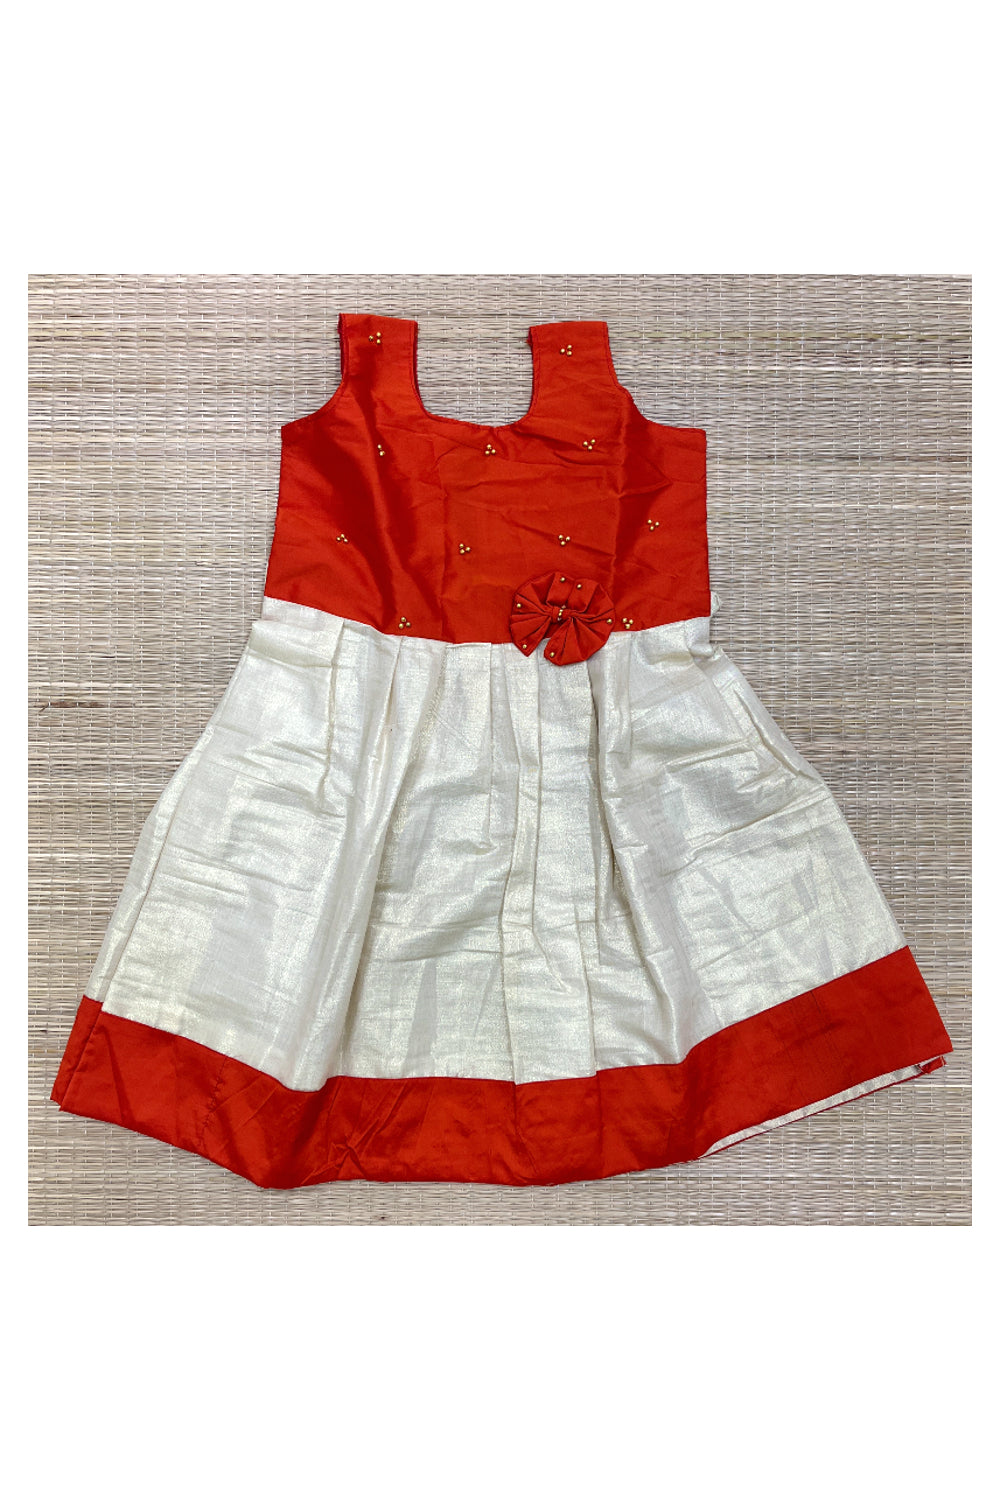 Southloom Kerala Tissue Frock with Red Bead Work Designs for Kids (5 Years)